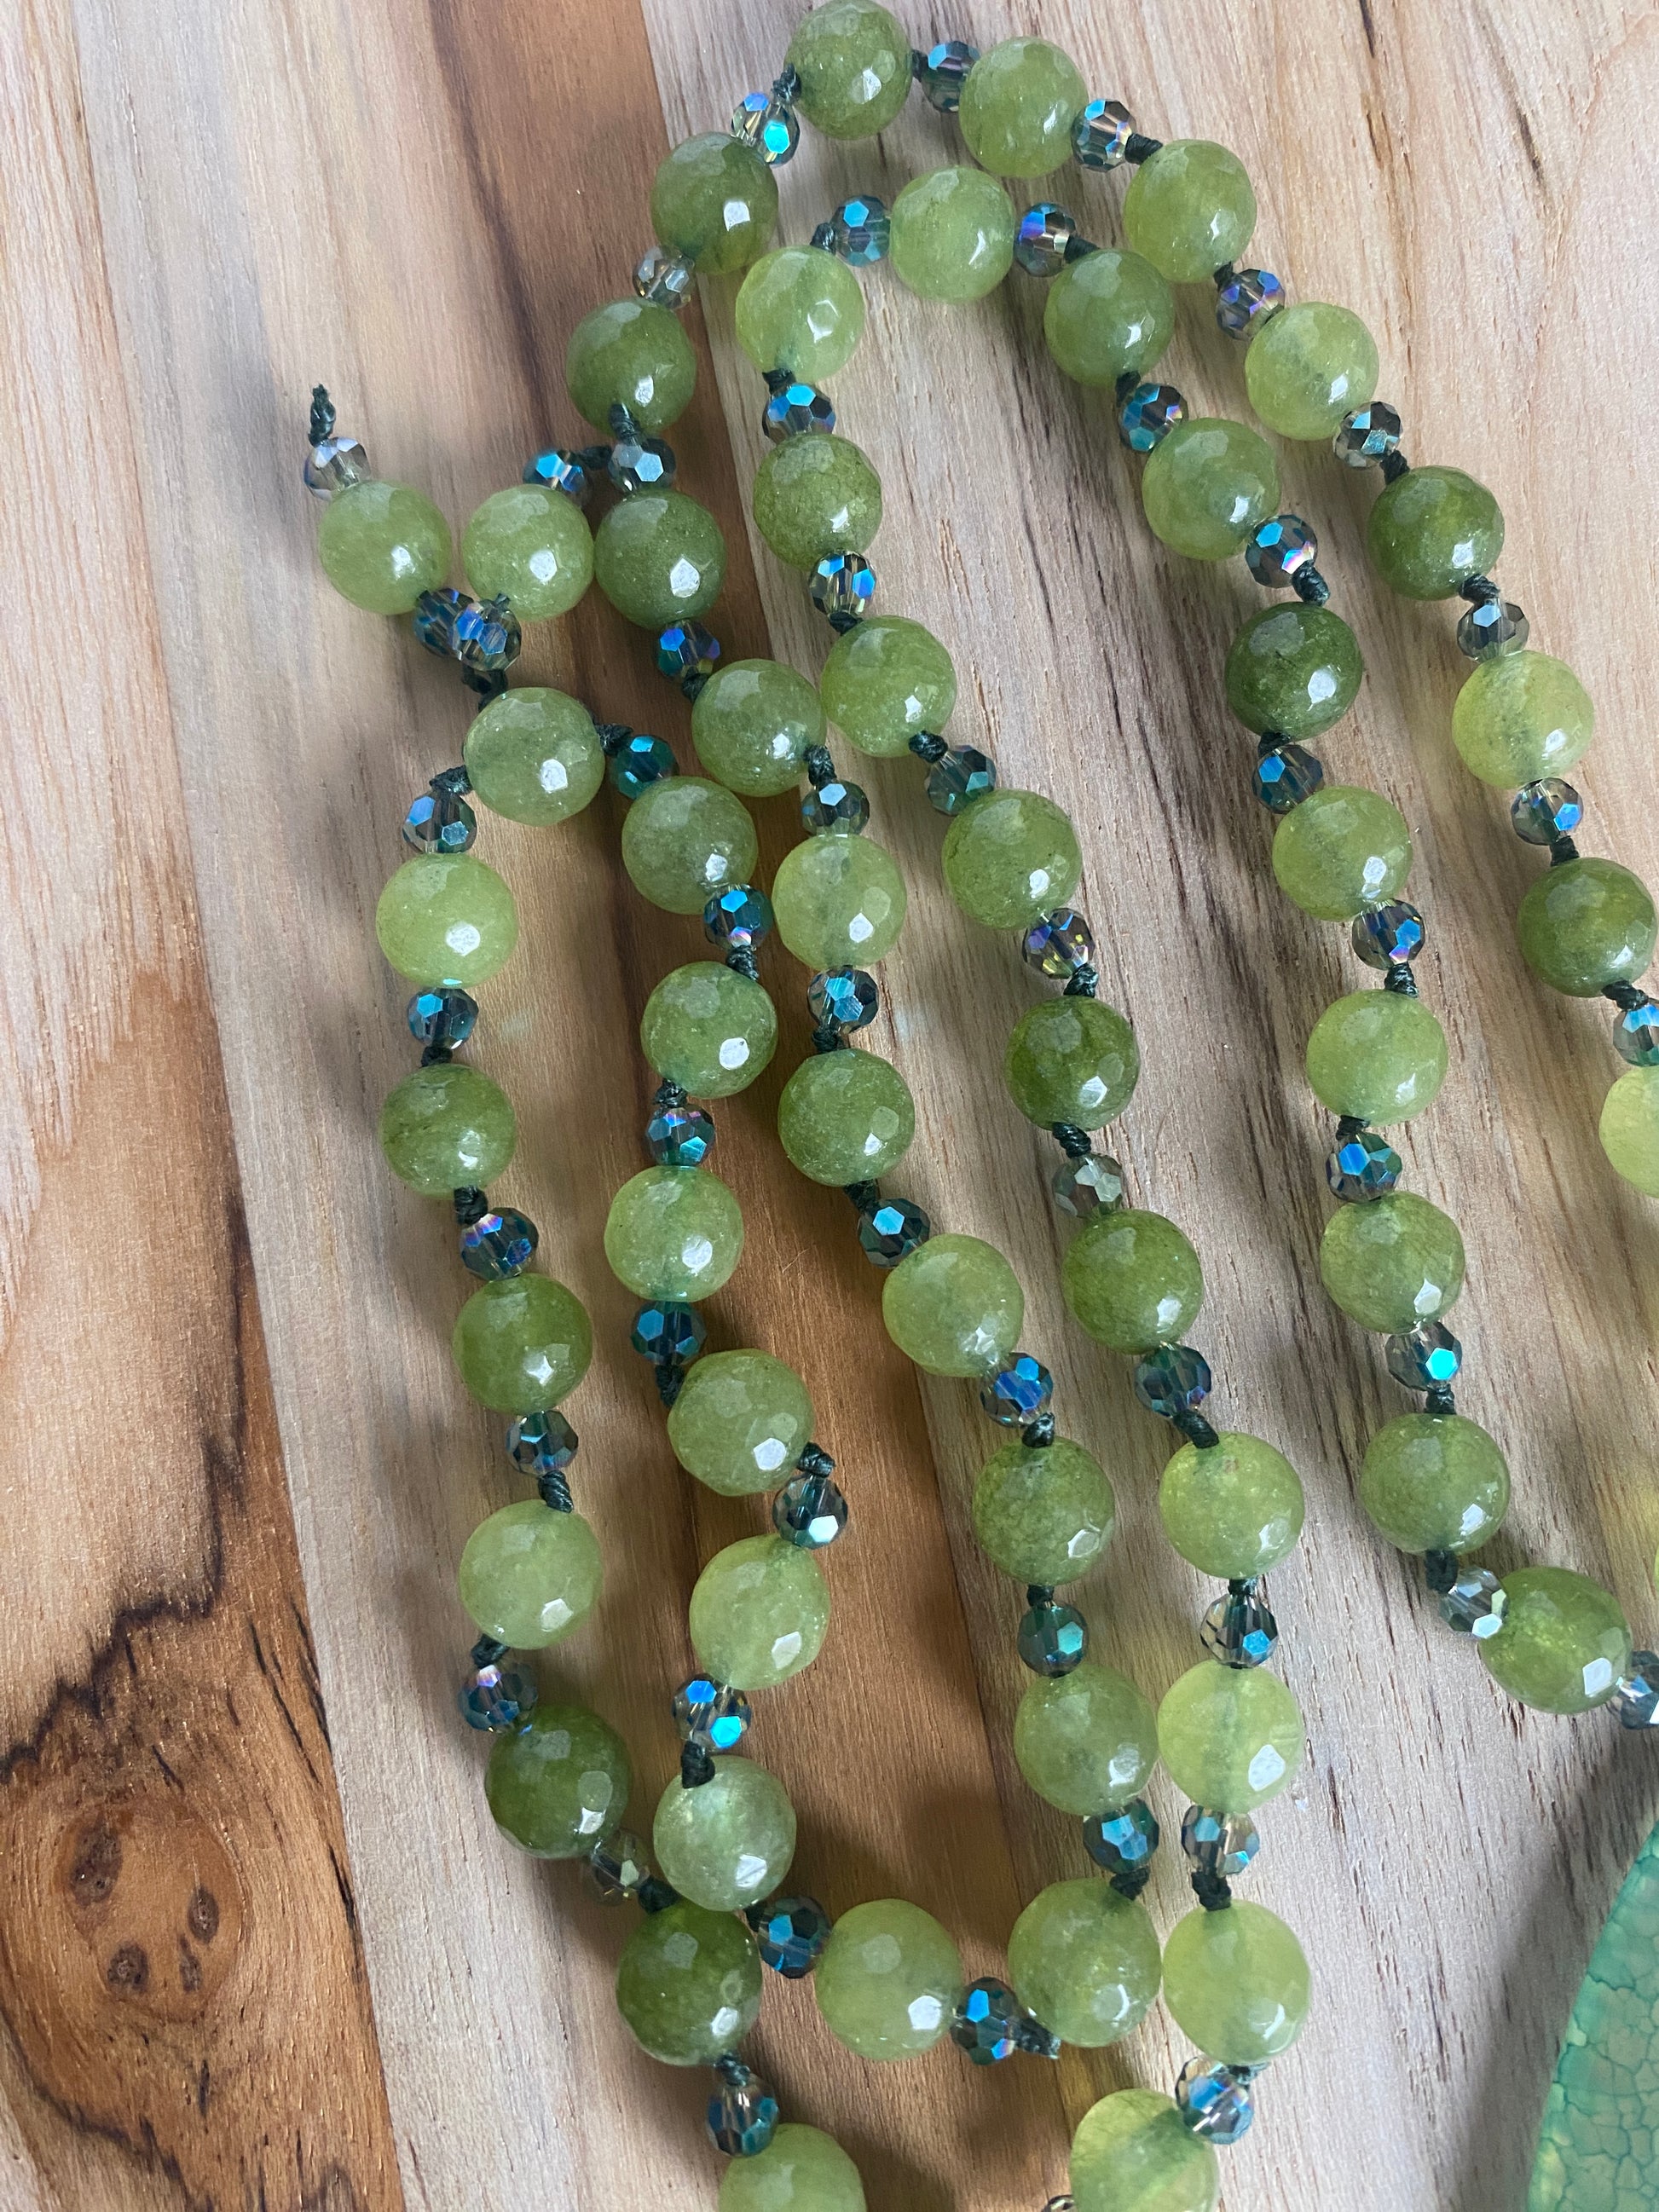 28" Long Green Dragon Vein Agate Pendant Necklace with Green Agate & Crystal Beads - My Urban Gems